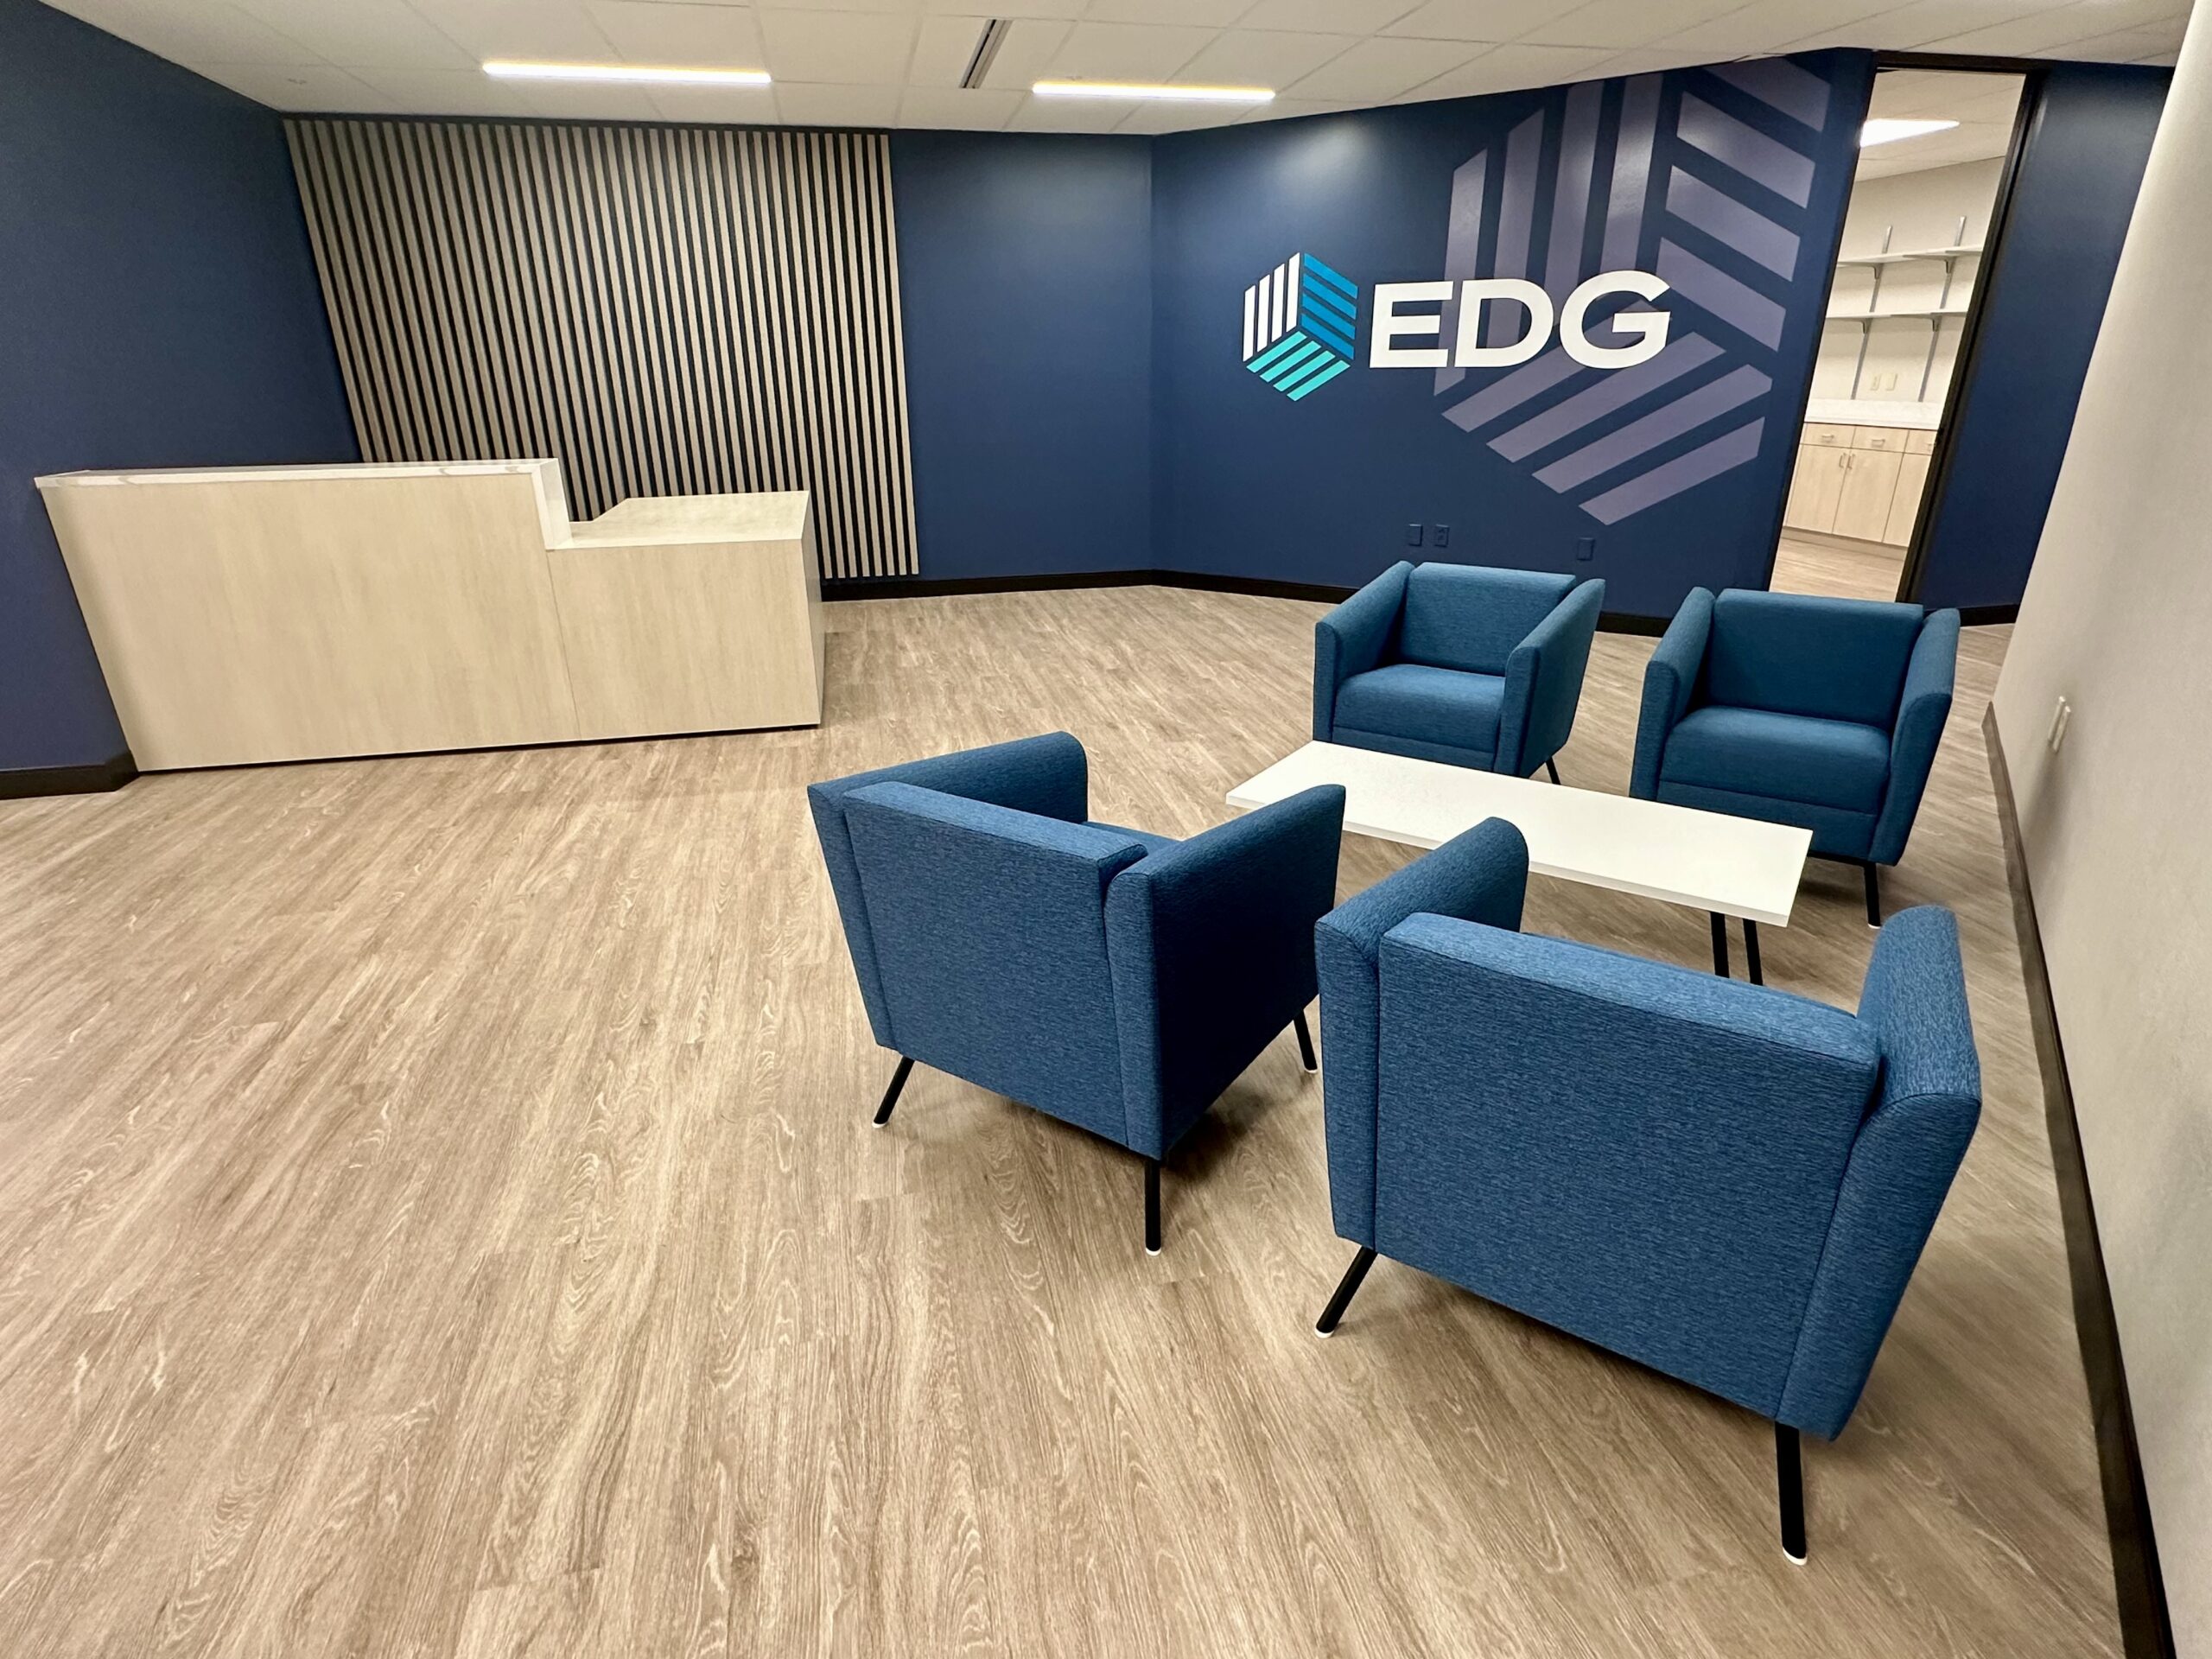 EDG consulting engineers